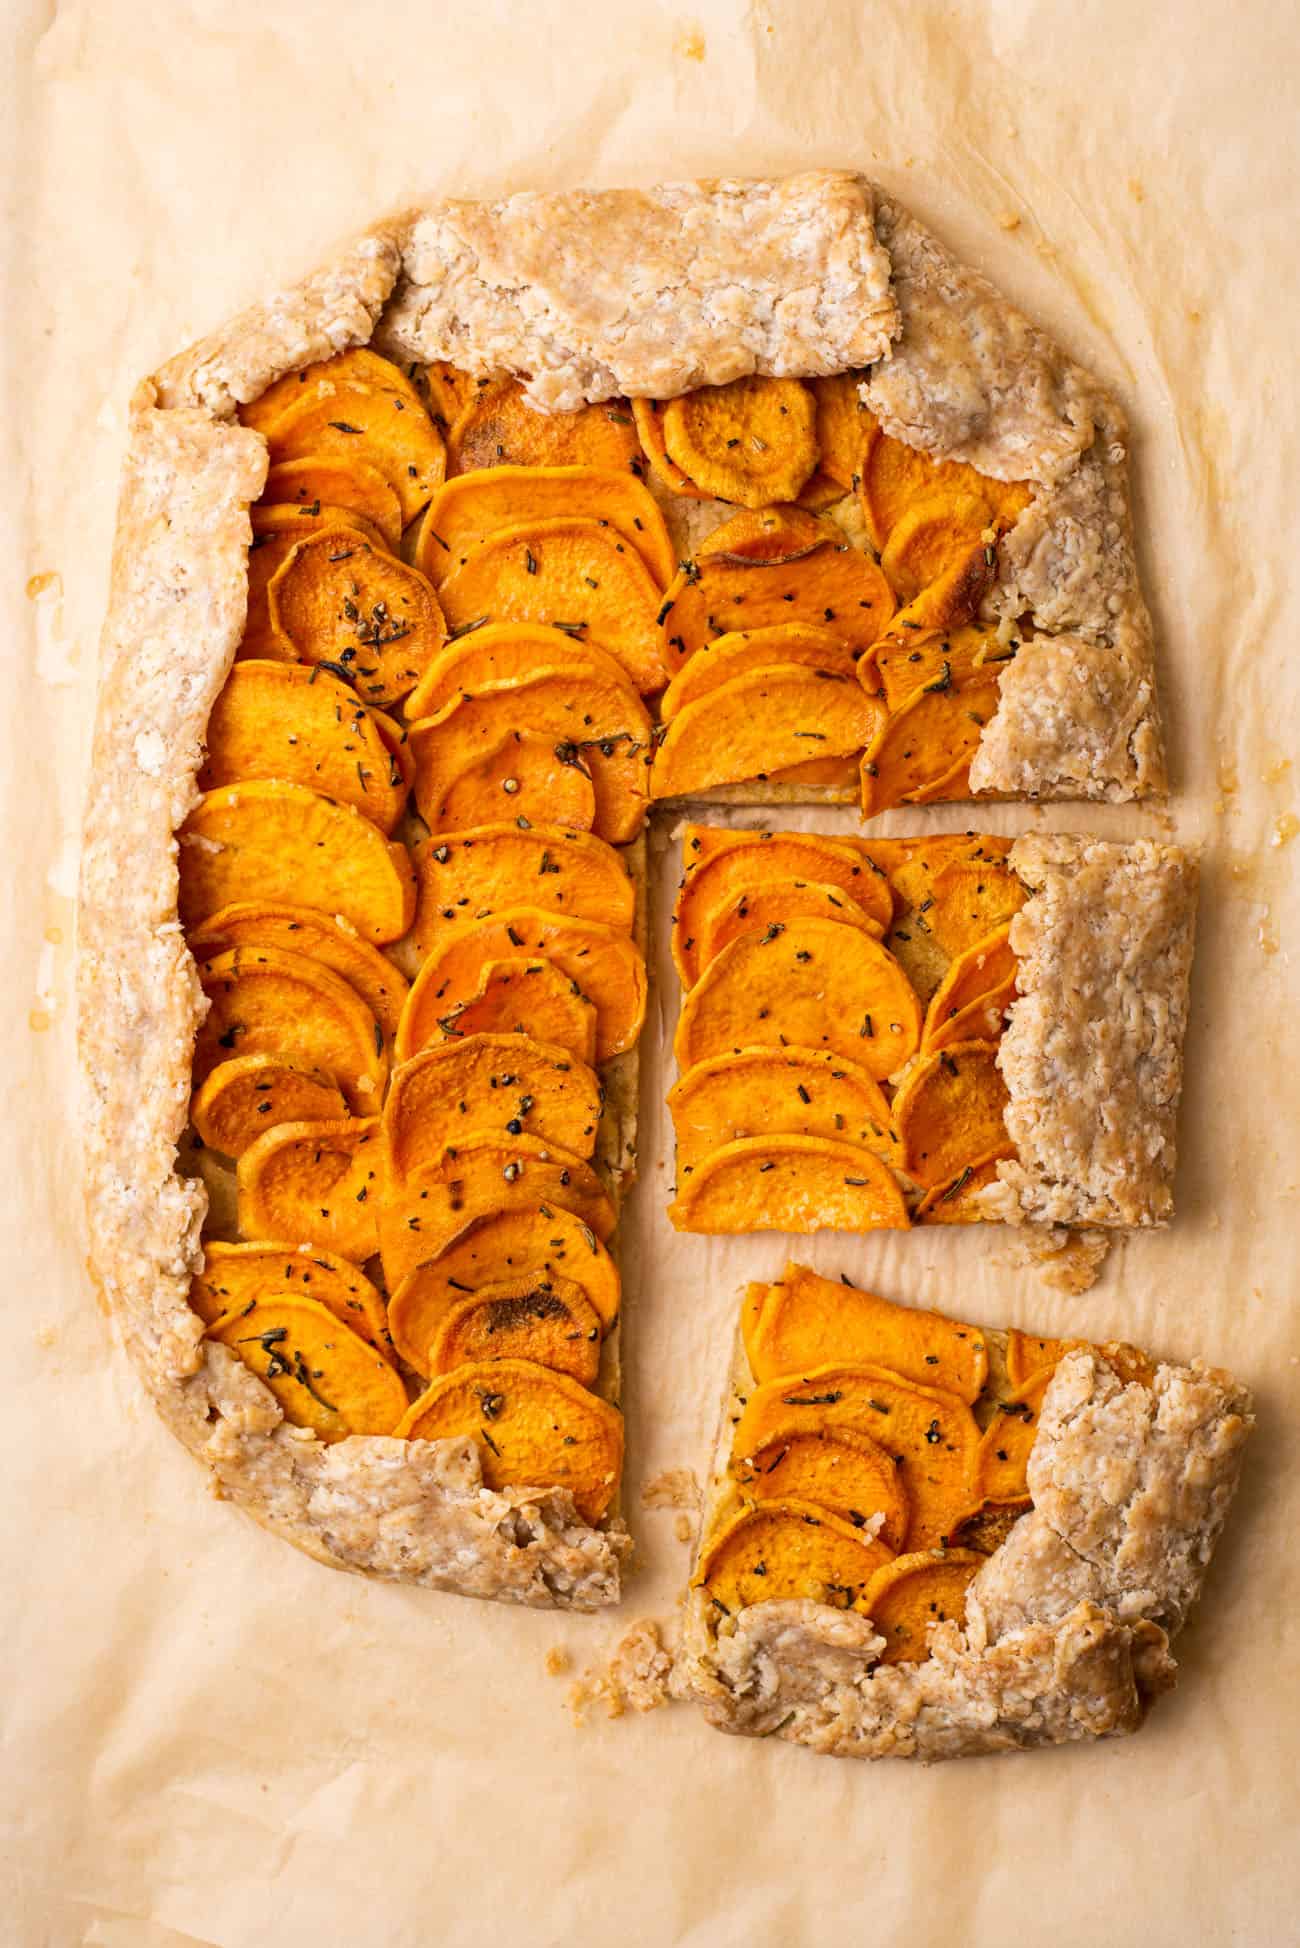 Rectangular vegan sweet potato galette with cashew ricotta on brown parchment paper cut into slices.